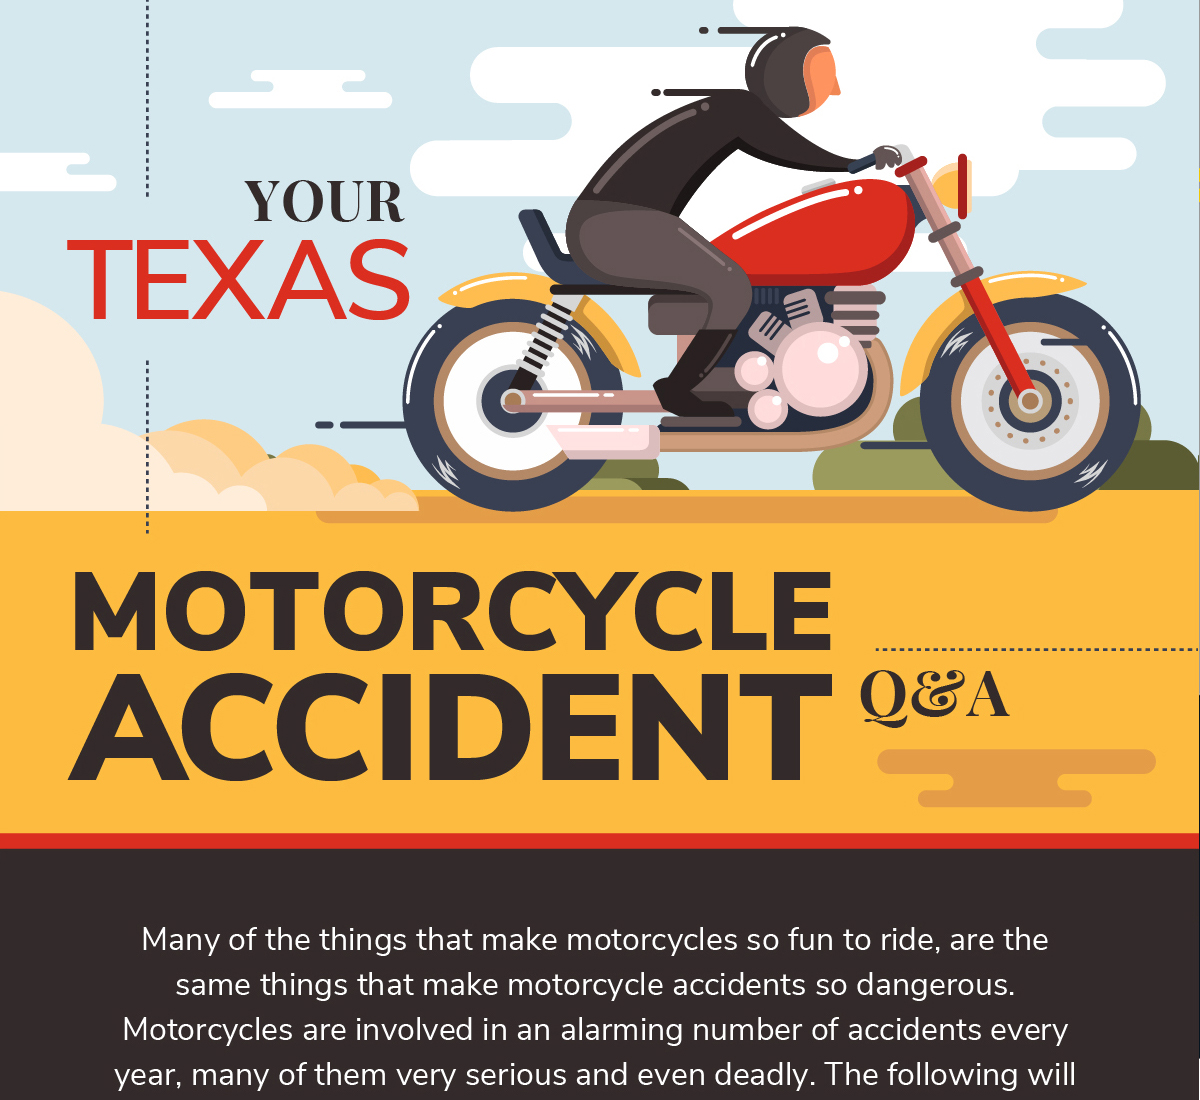 Motorcycle accident infographic link